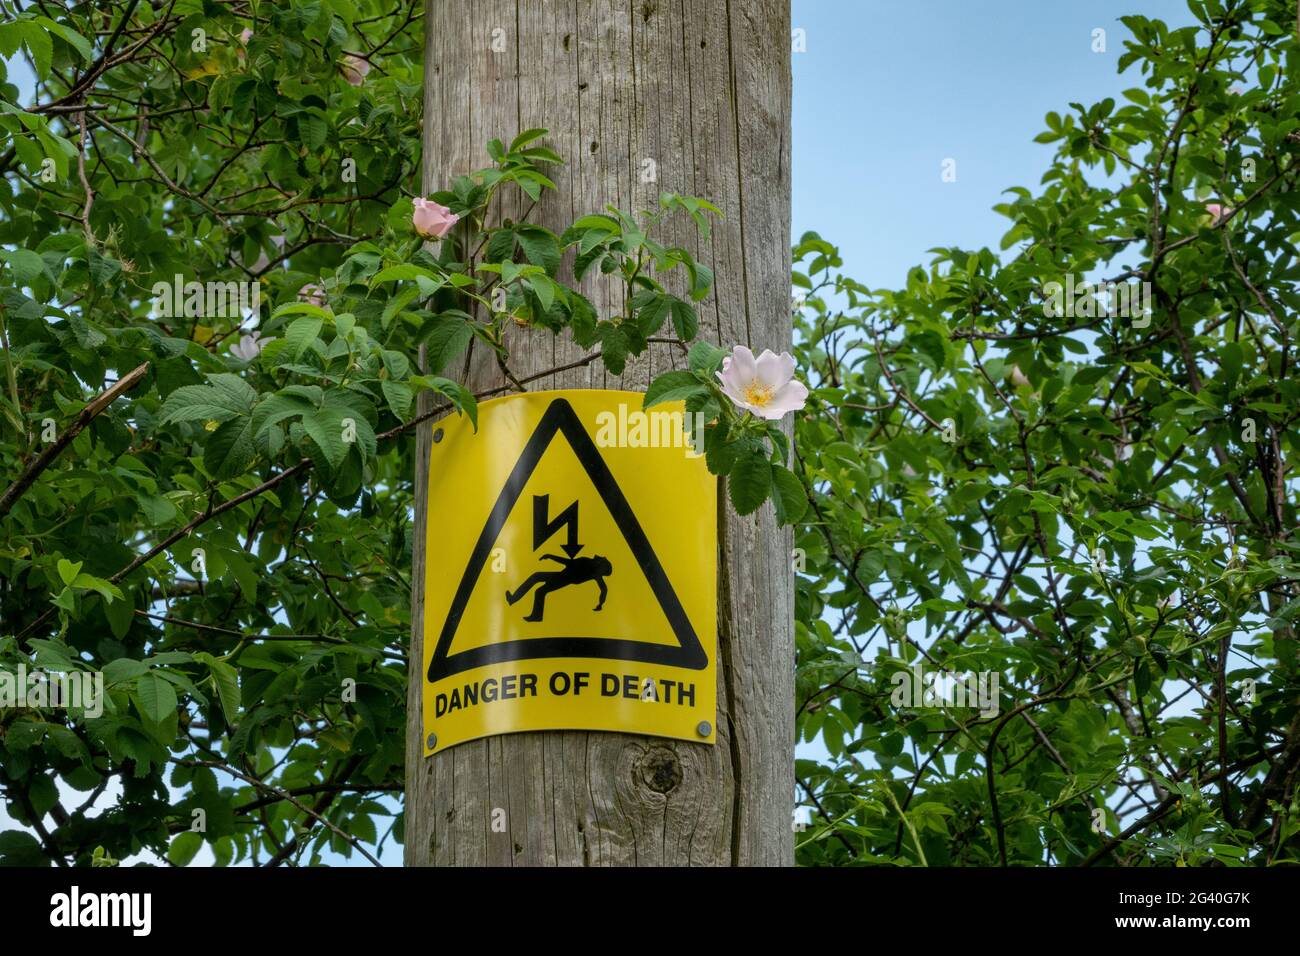 Danger of Death sign in yellow and black on a wooden telegraph pole Stock Photo